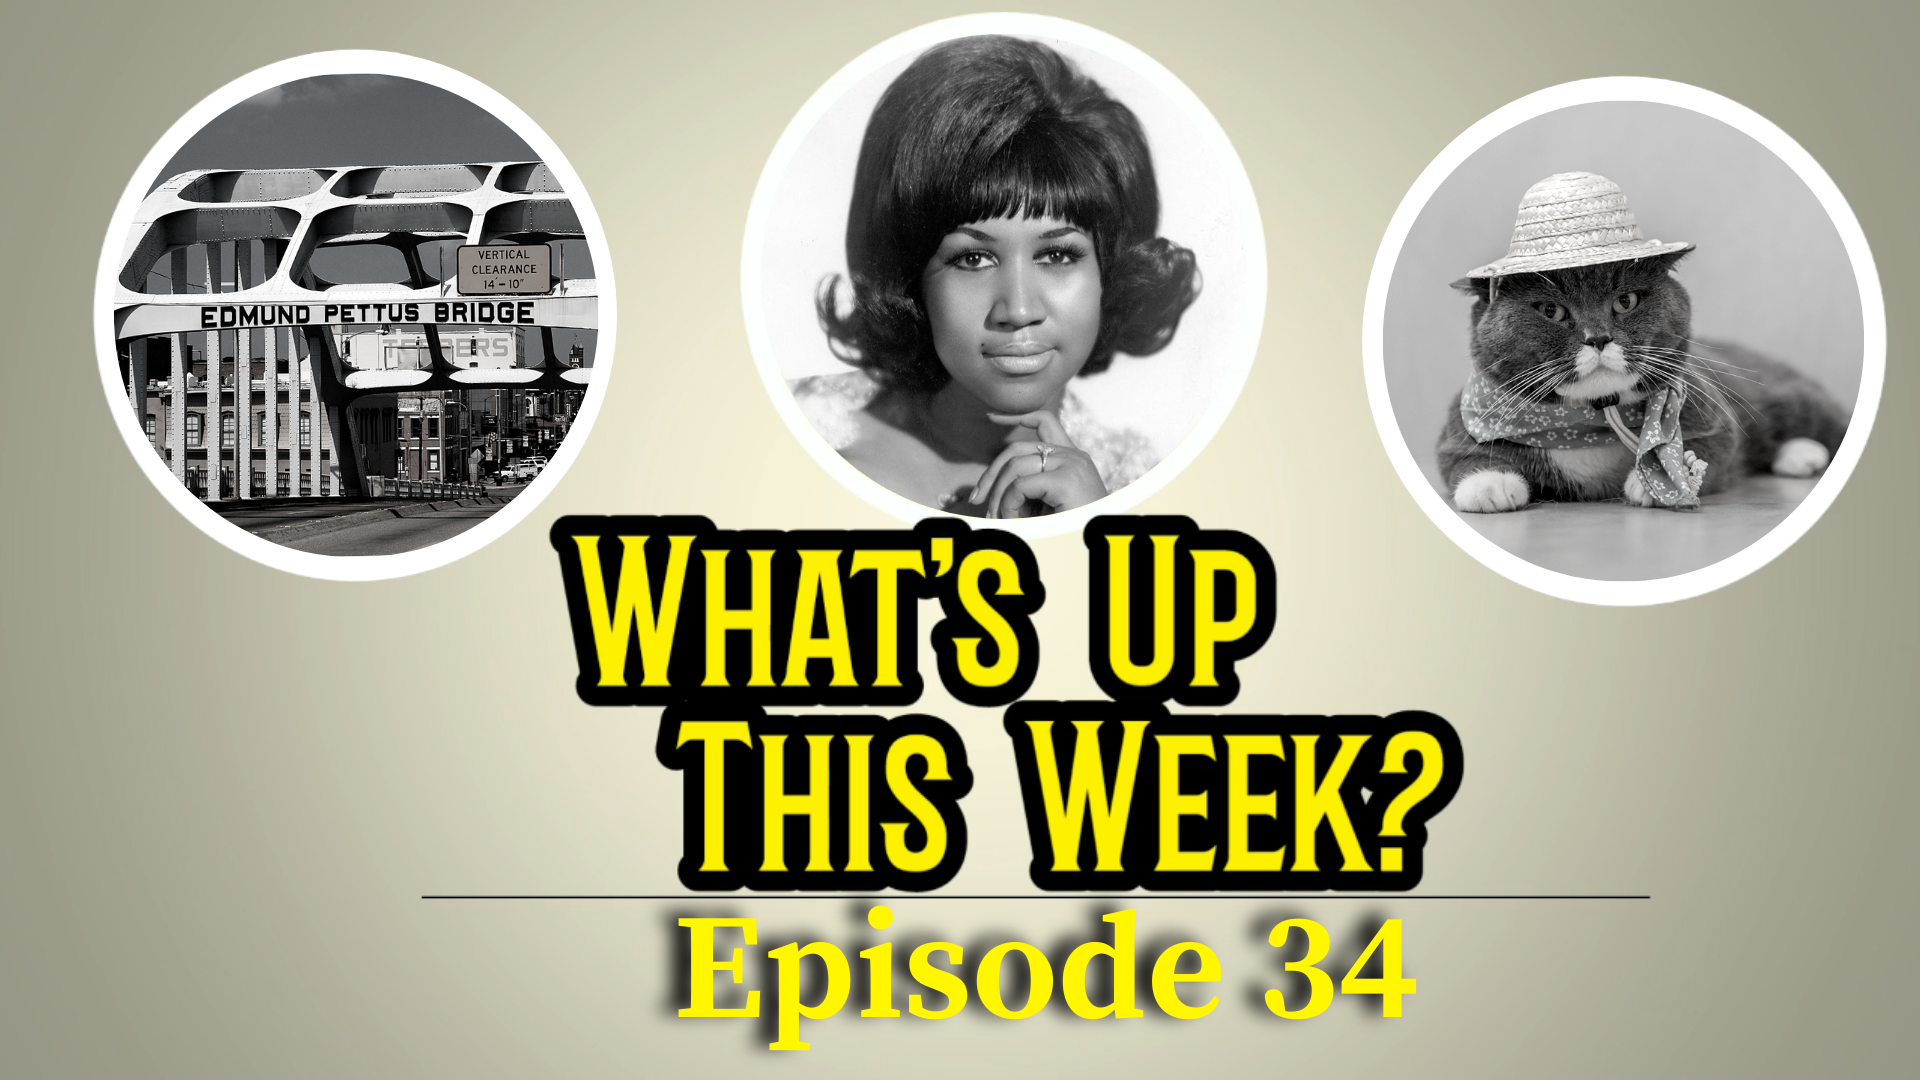 Text: What's Up This Week? Episode 29. 3 images in circles: the Edmund Pettus Bridge, Aretha Franklin, and a cat with a hat on its head.